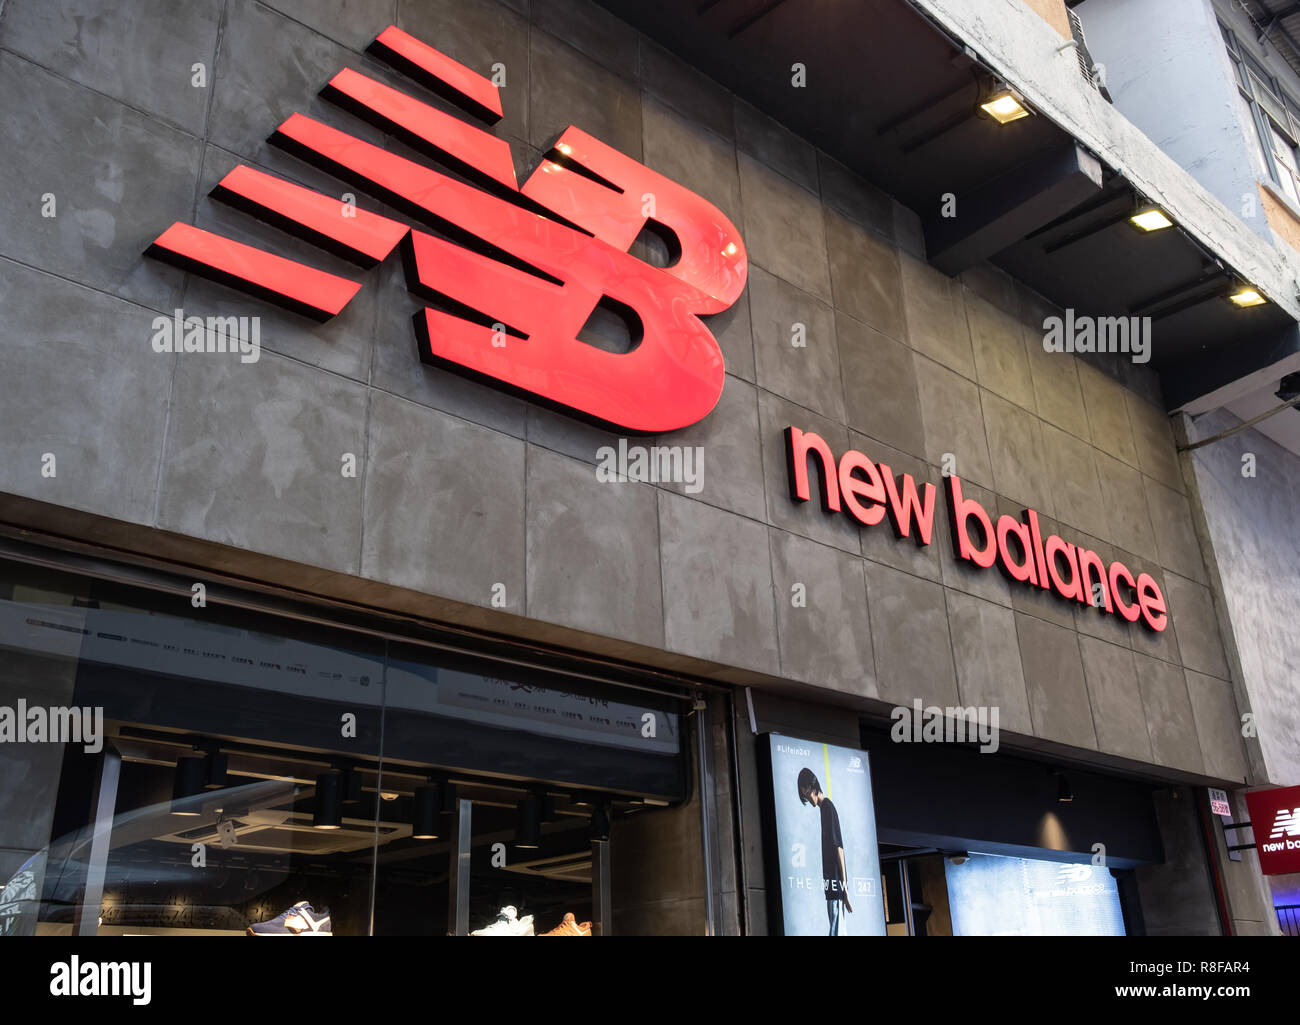 New Balance Store High Resolution Stock Photography and Images - Alamy